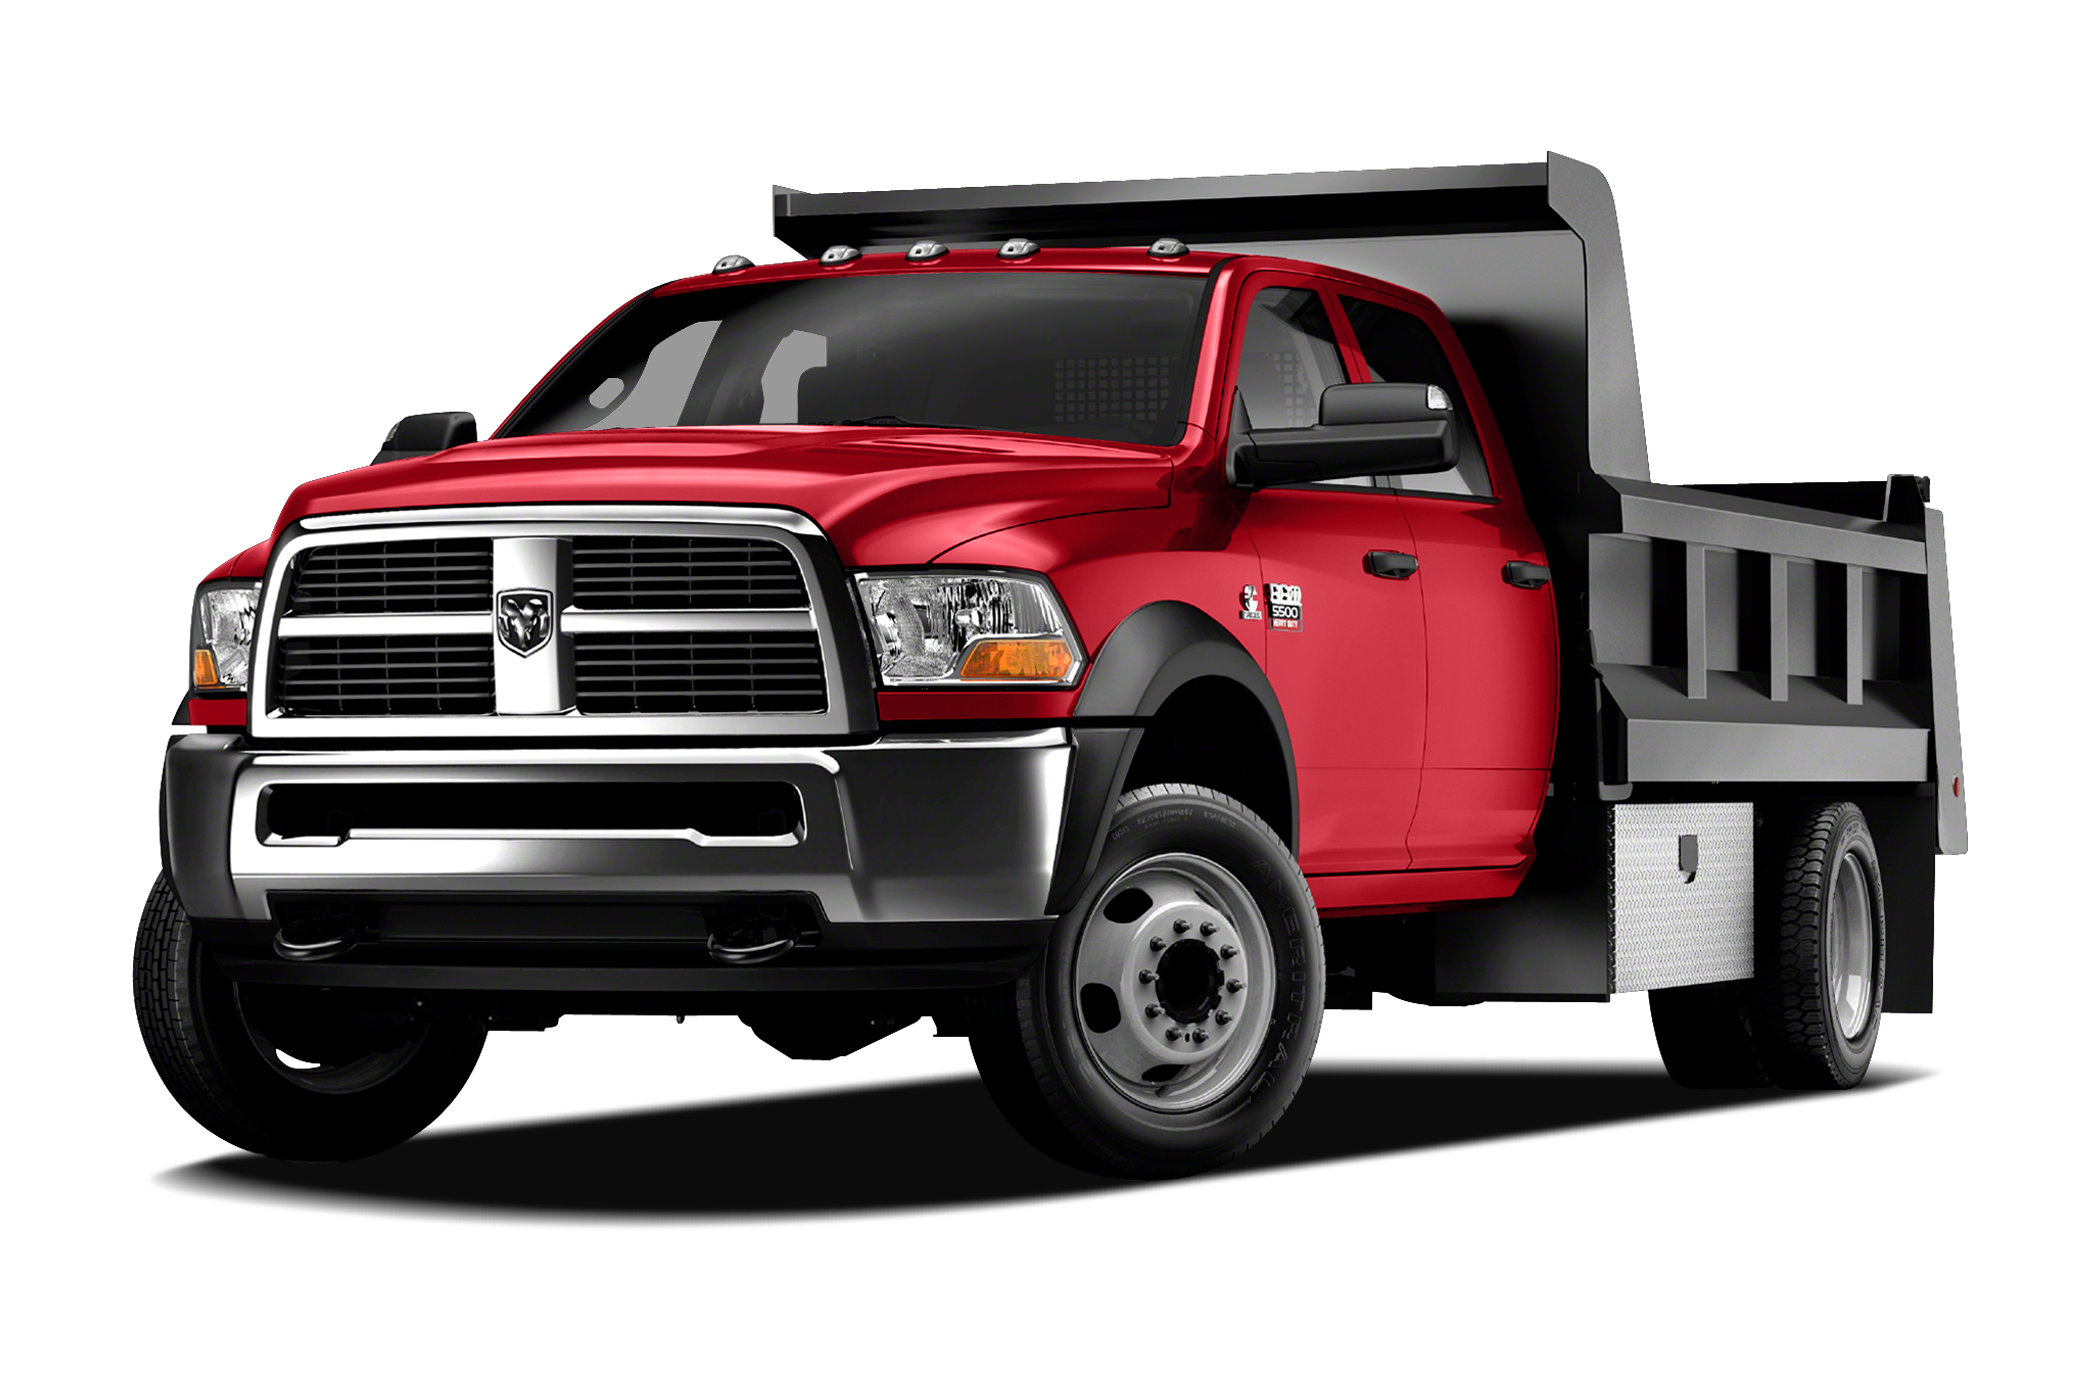 2012 Ram 3500 Specs Price Mpg And Reviews